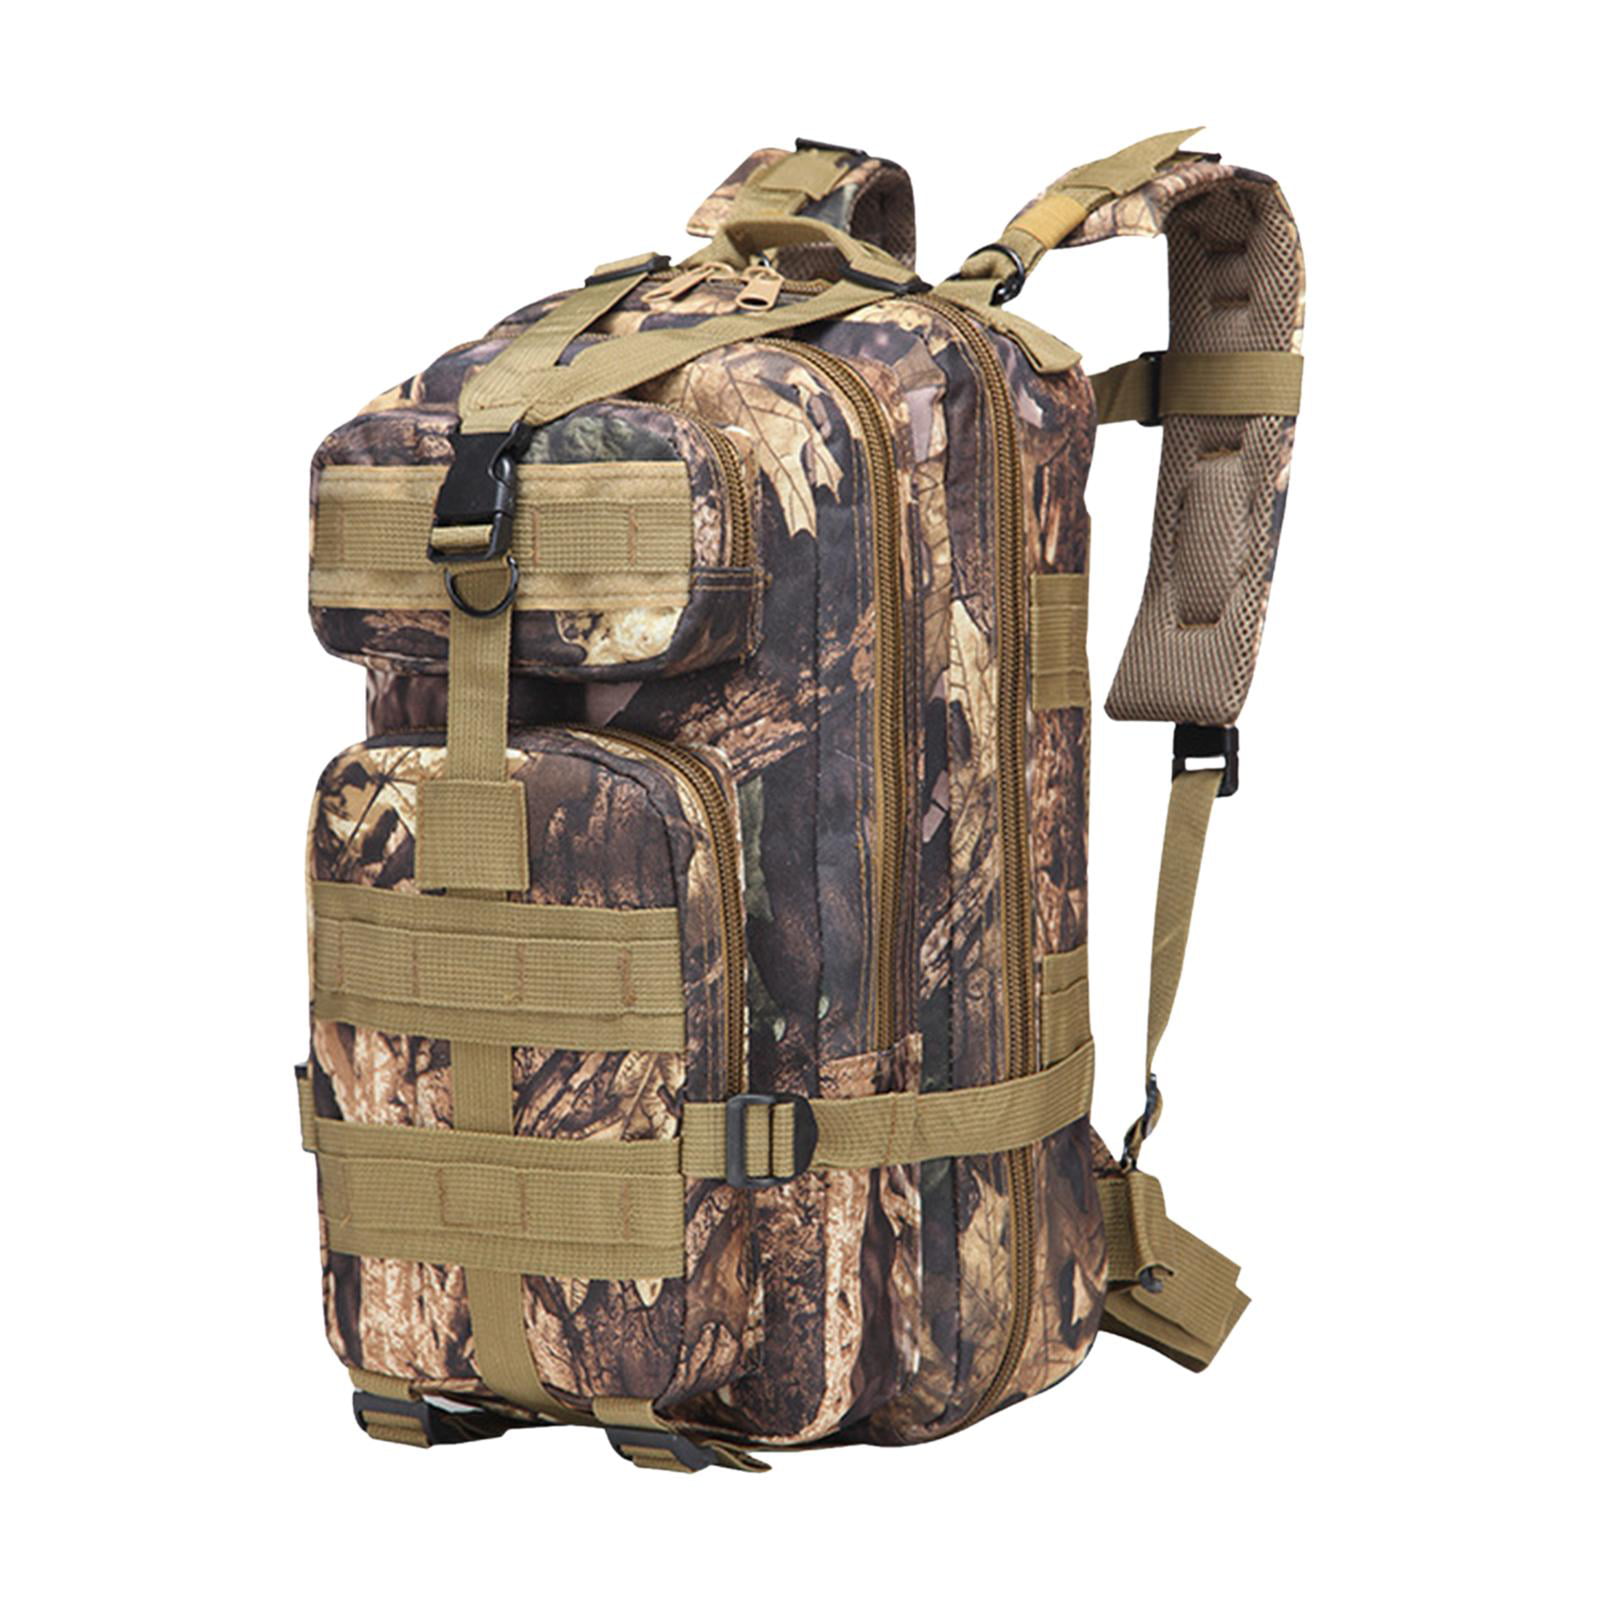 US Waterproof Camo Outdoor Sports Mountaineering Bag 30L Jungle Camouflage 